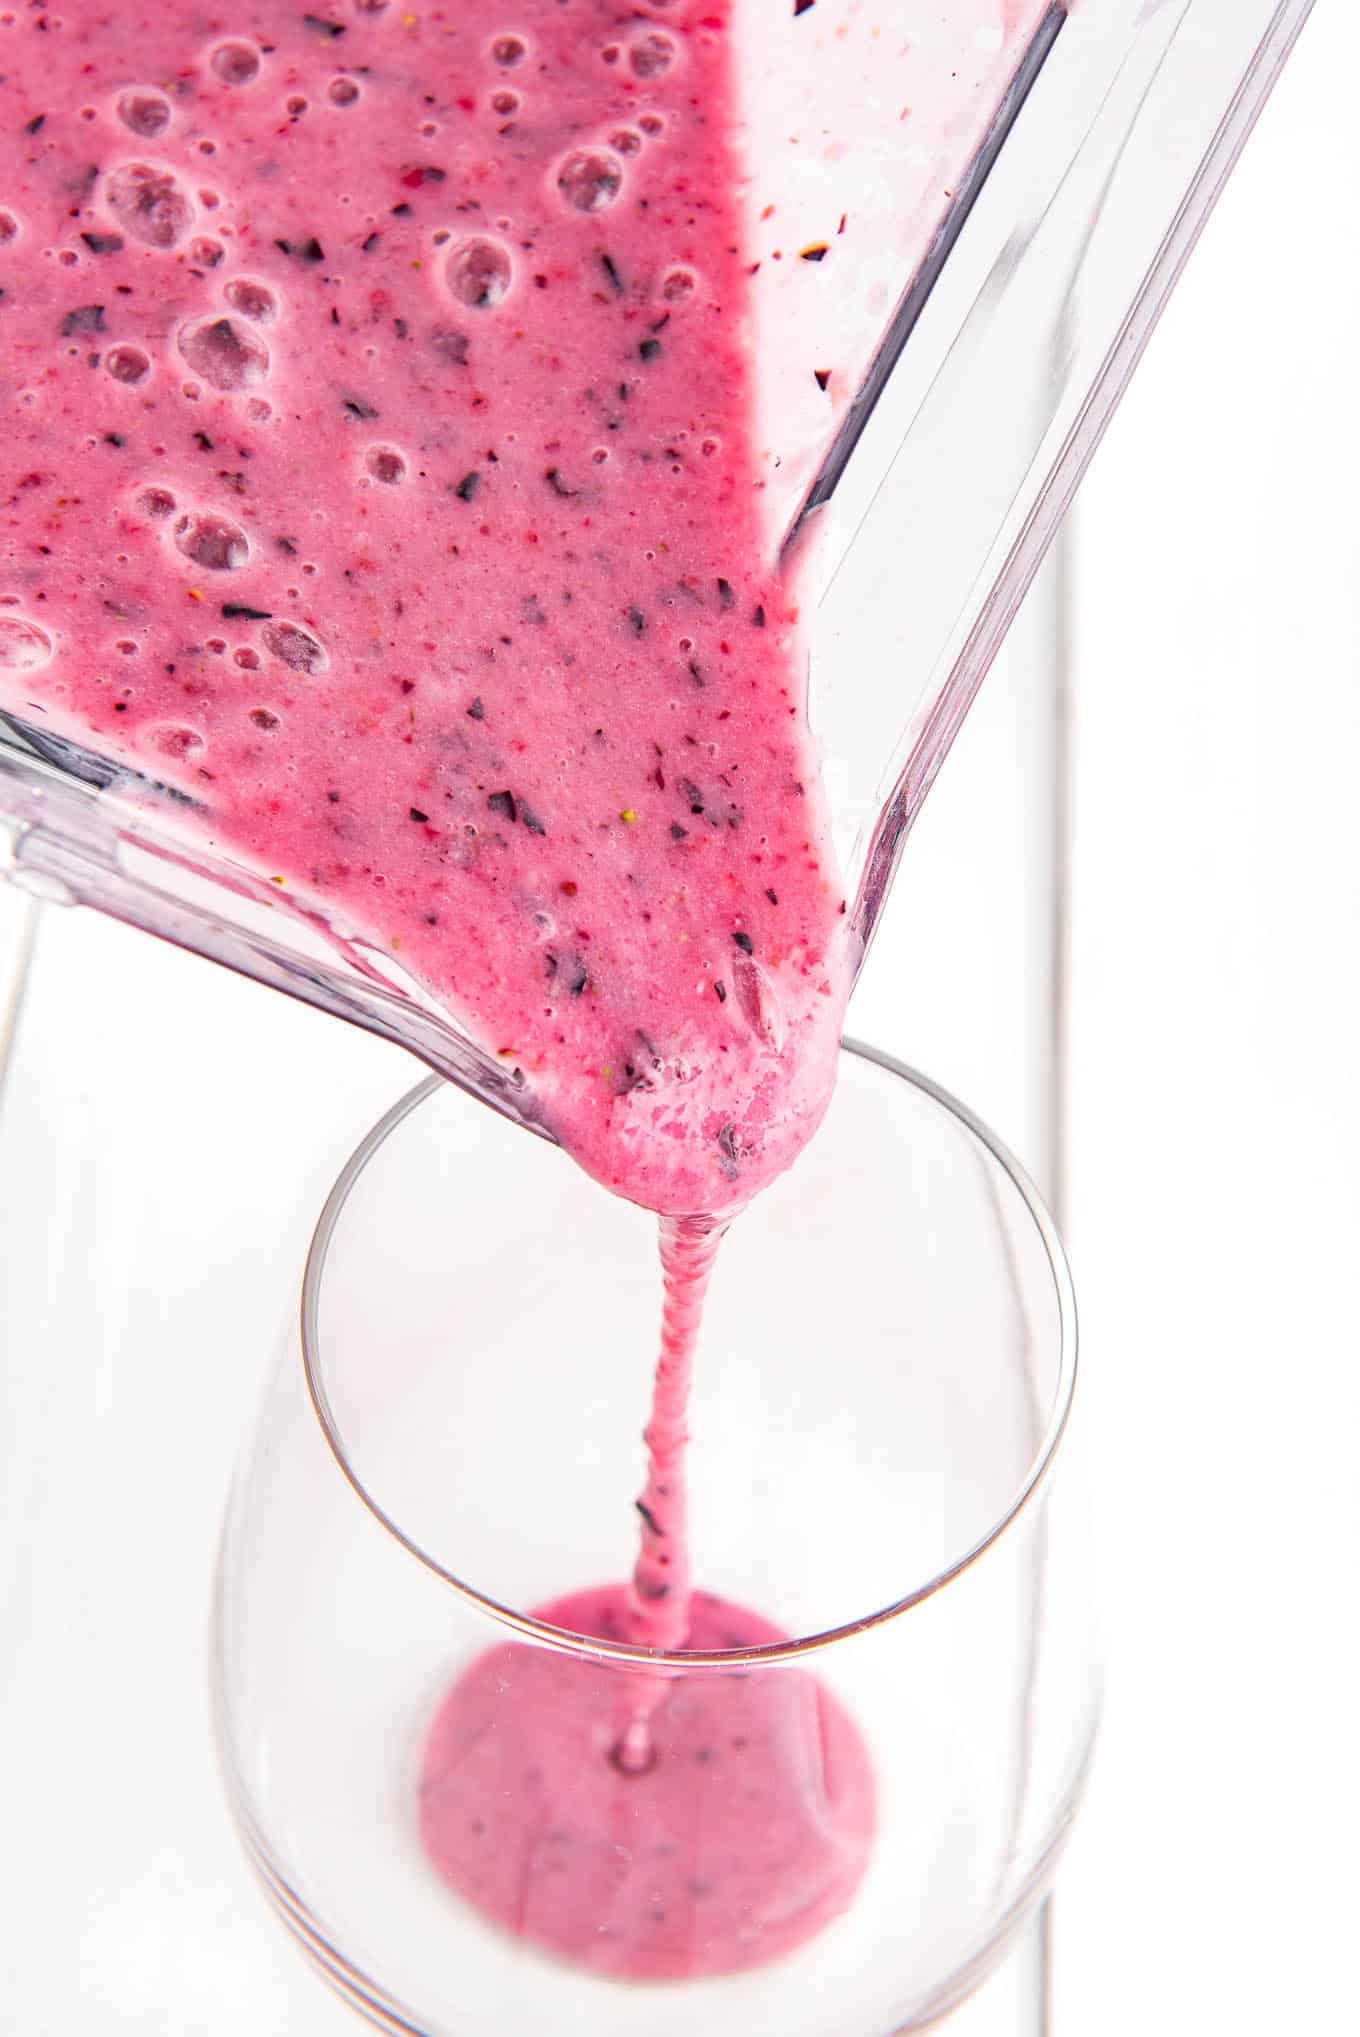 Pouring blueberry smoothie.